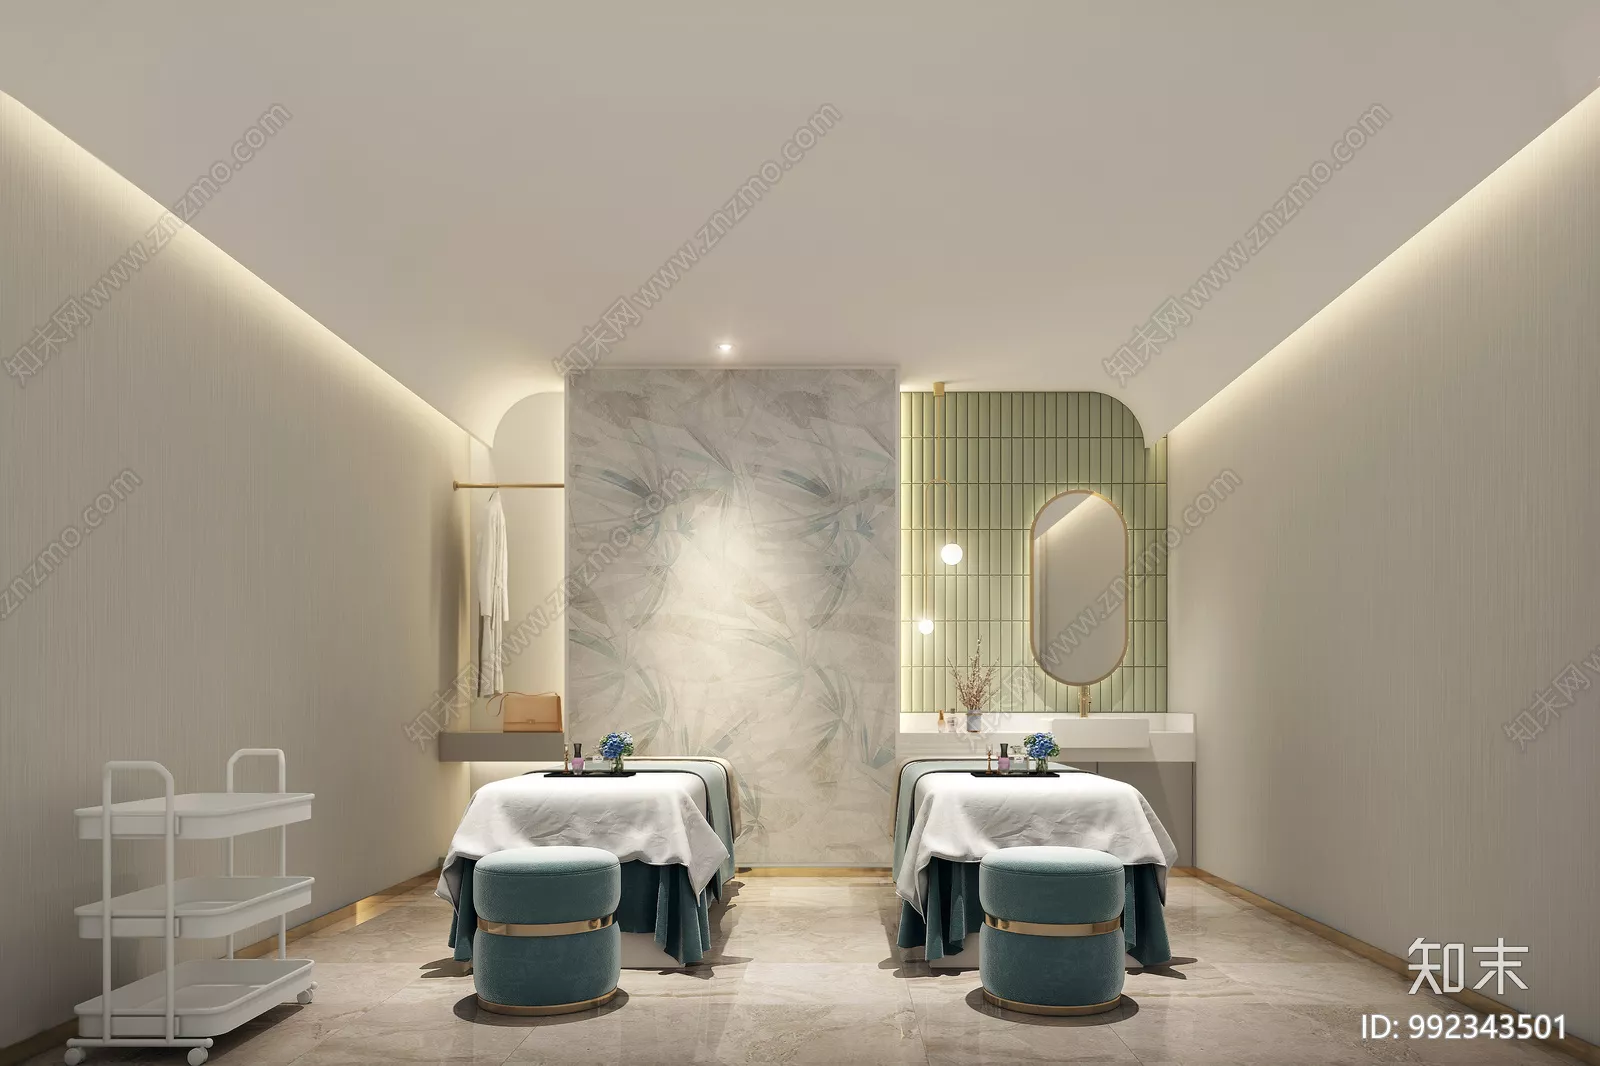 MODERN SPA AND BEAUTY - SKETCHUP 3D SCENE - VRAY OR ENSCAPE - ID13912